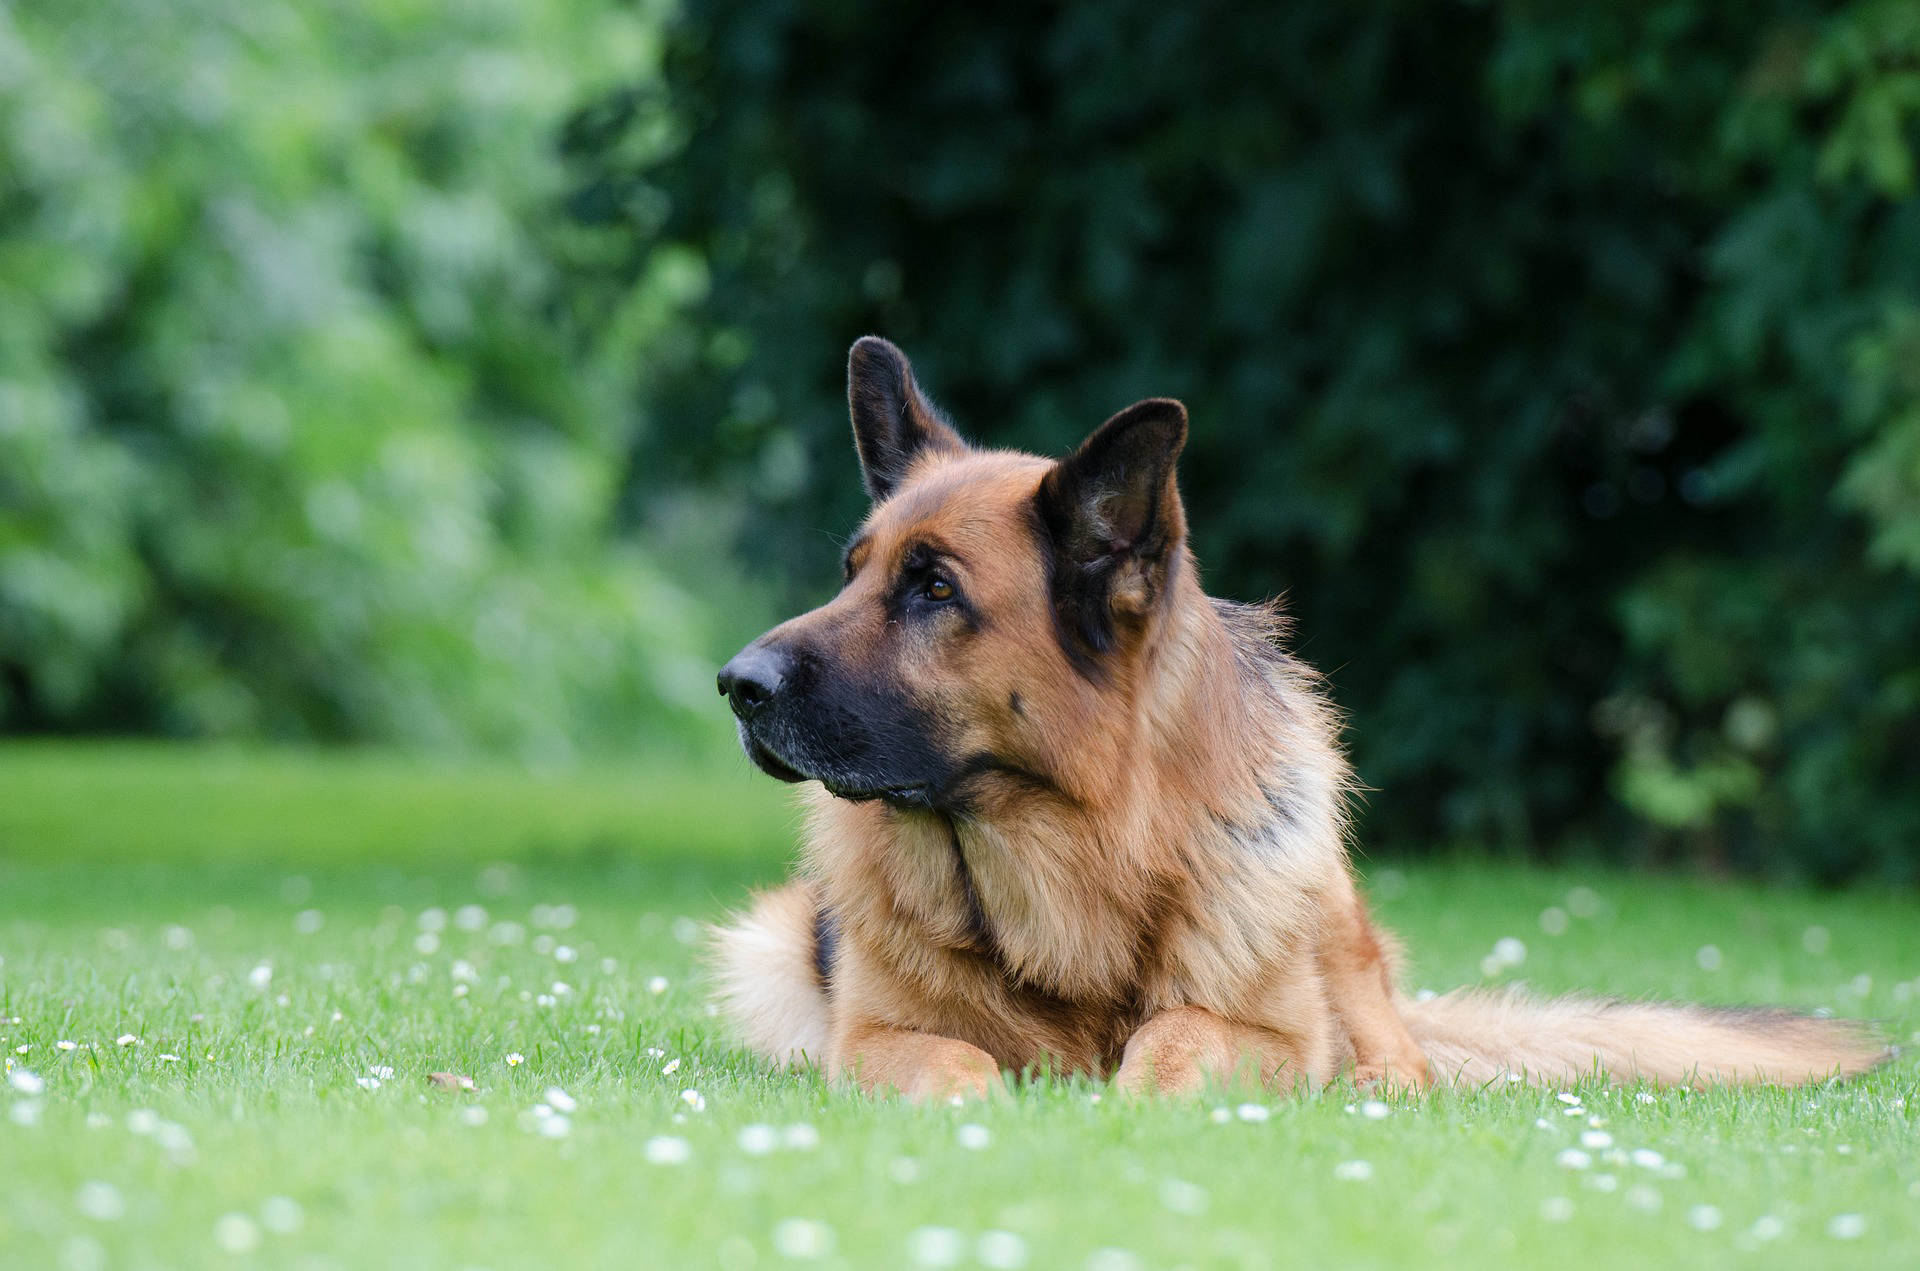 Rehoming your German shepherd at the UK German Shepherd Rescue. Don't leave your dog to fate, use our trusted rehoming charity to find them a new fully vetted loving home.